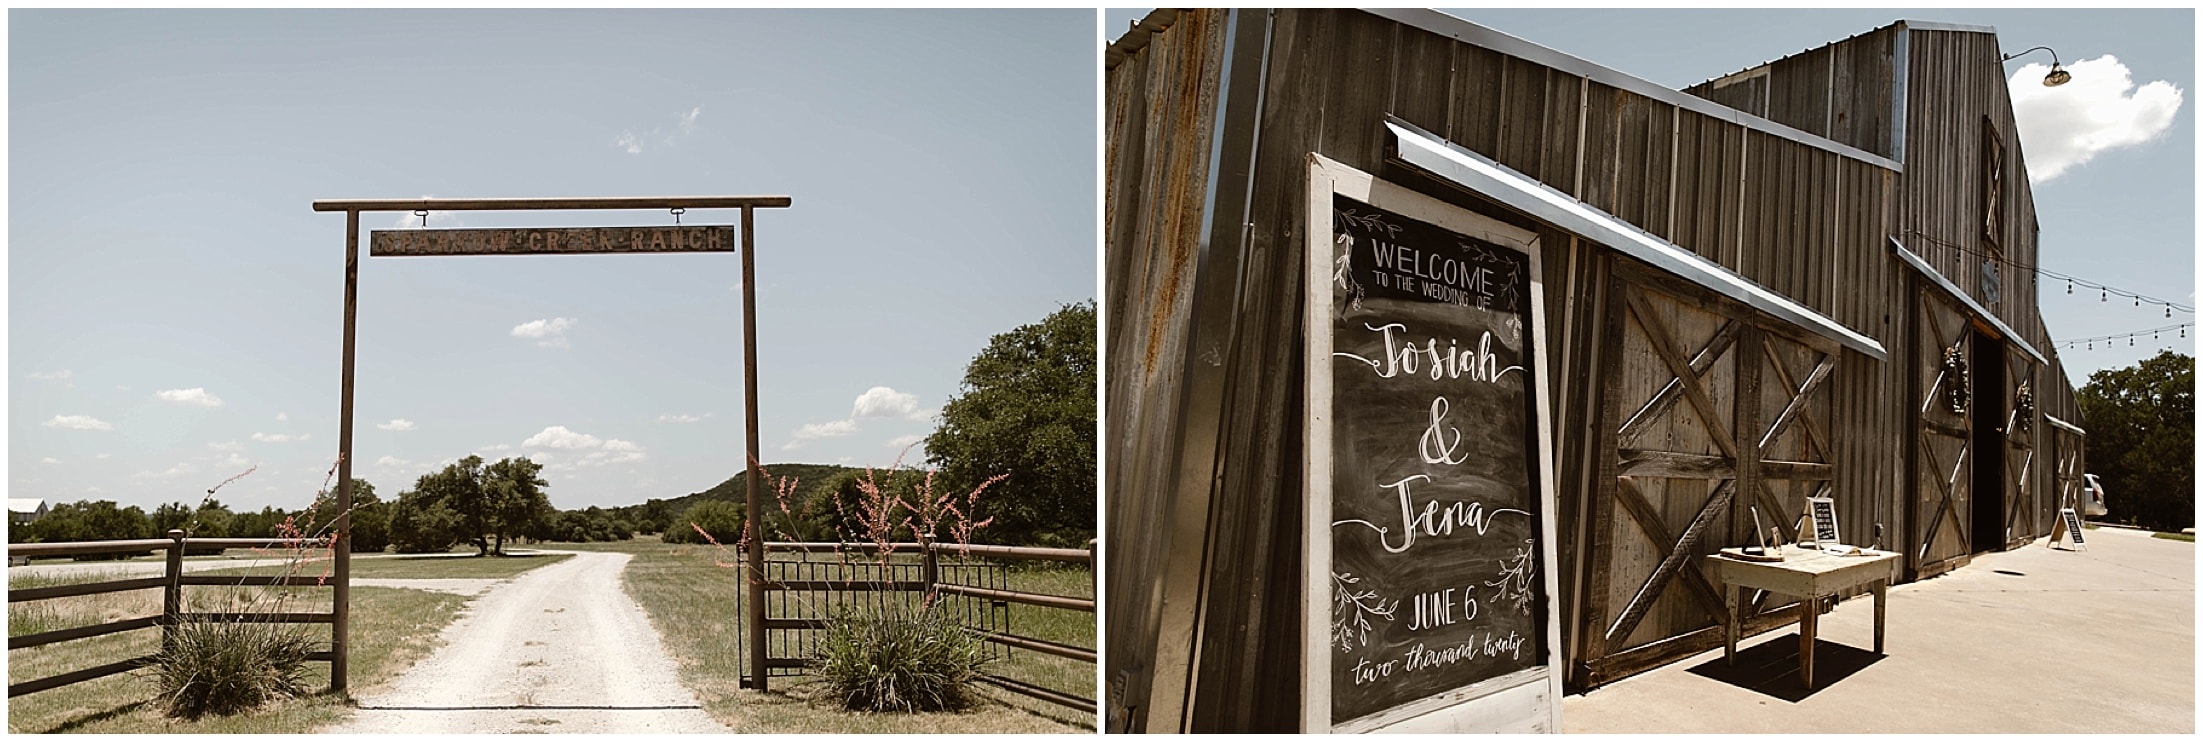 Outdoor Barn wedding in Texas, Brit Nicole Photography, West Texas Barn Wedding, West Texas Small Wedding, West Texas wedding venue, DJ Platinum, Vera Wang engagement ring, Zales Manly Bands wedding ring, David's Bridal wedding dress, Krazy Cakes brides wedding cake, wedding cupcake, Betsey Johnson wedding high heels, Joy's Downtown Flowers wedding decor, Sparrow Creek Ranch, texas wedding ranch, places to get married in Texas, small intimate wedding, summer wedding, texas sky, bride and groom first look, first look with dad, matching bridesmaids robes, June wedding, junebug weddings, wandering weddings, the knot, best weddings